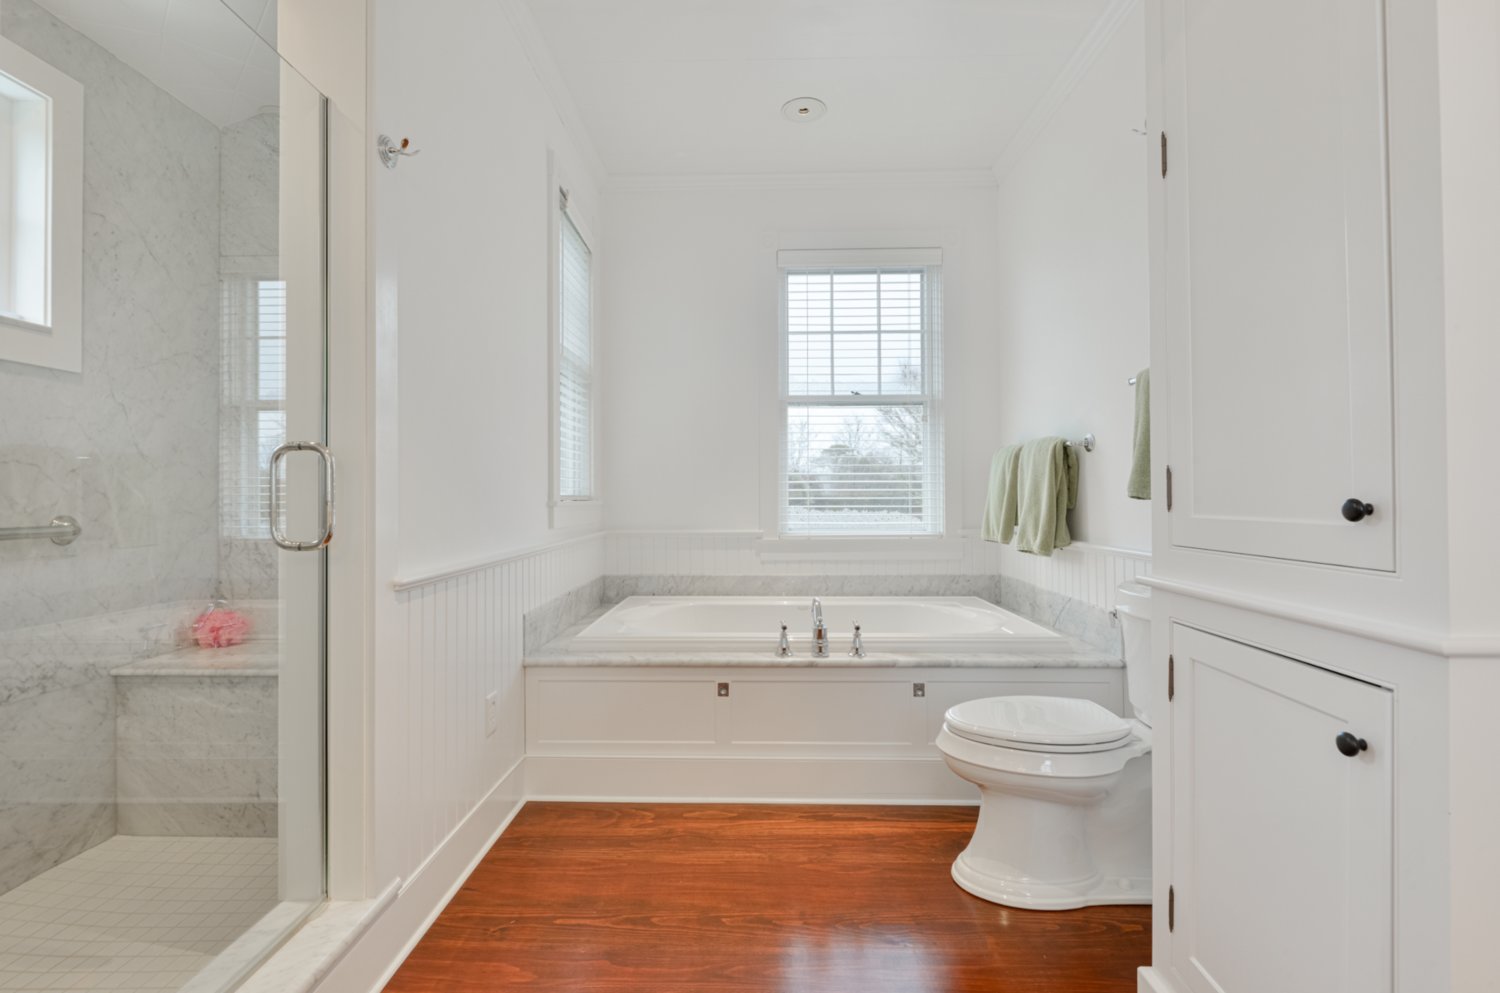 This bathroom has a soaking tub and separate glass-enclosed shower.